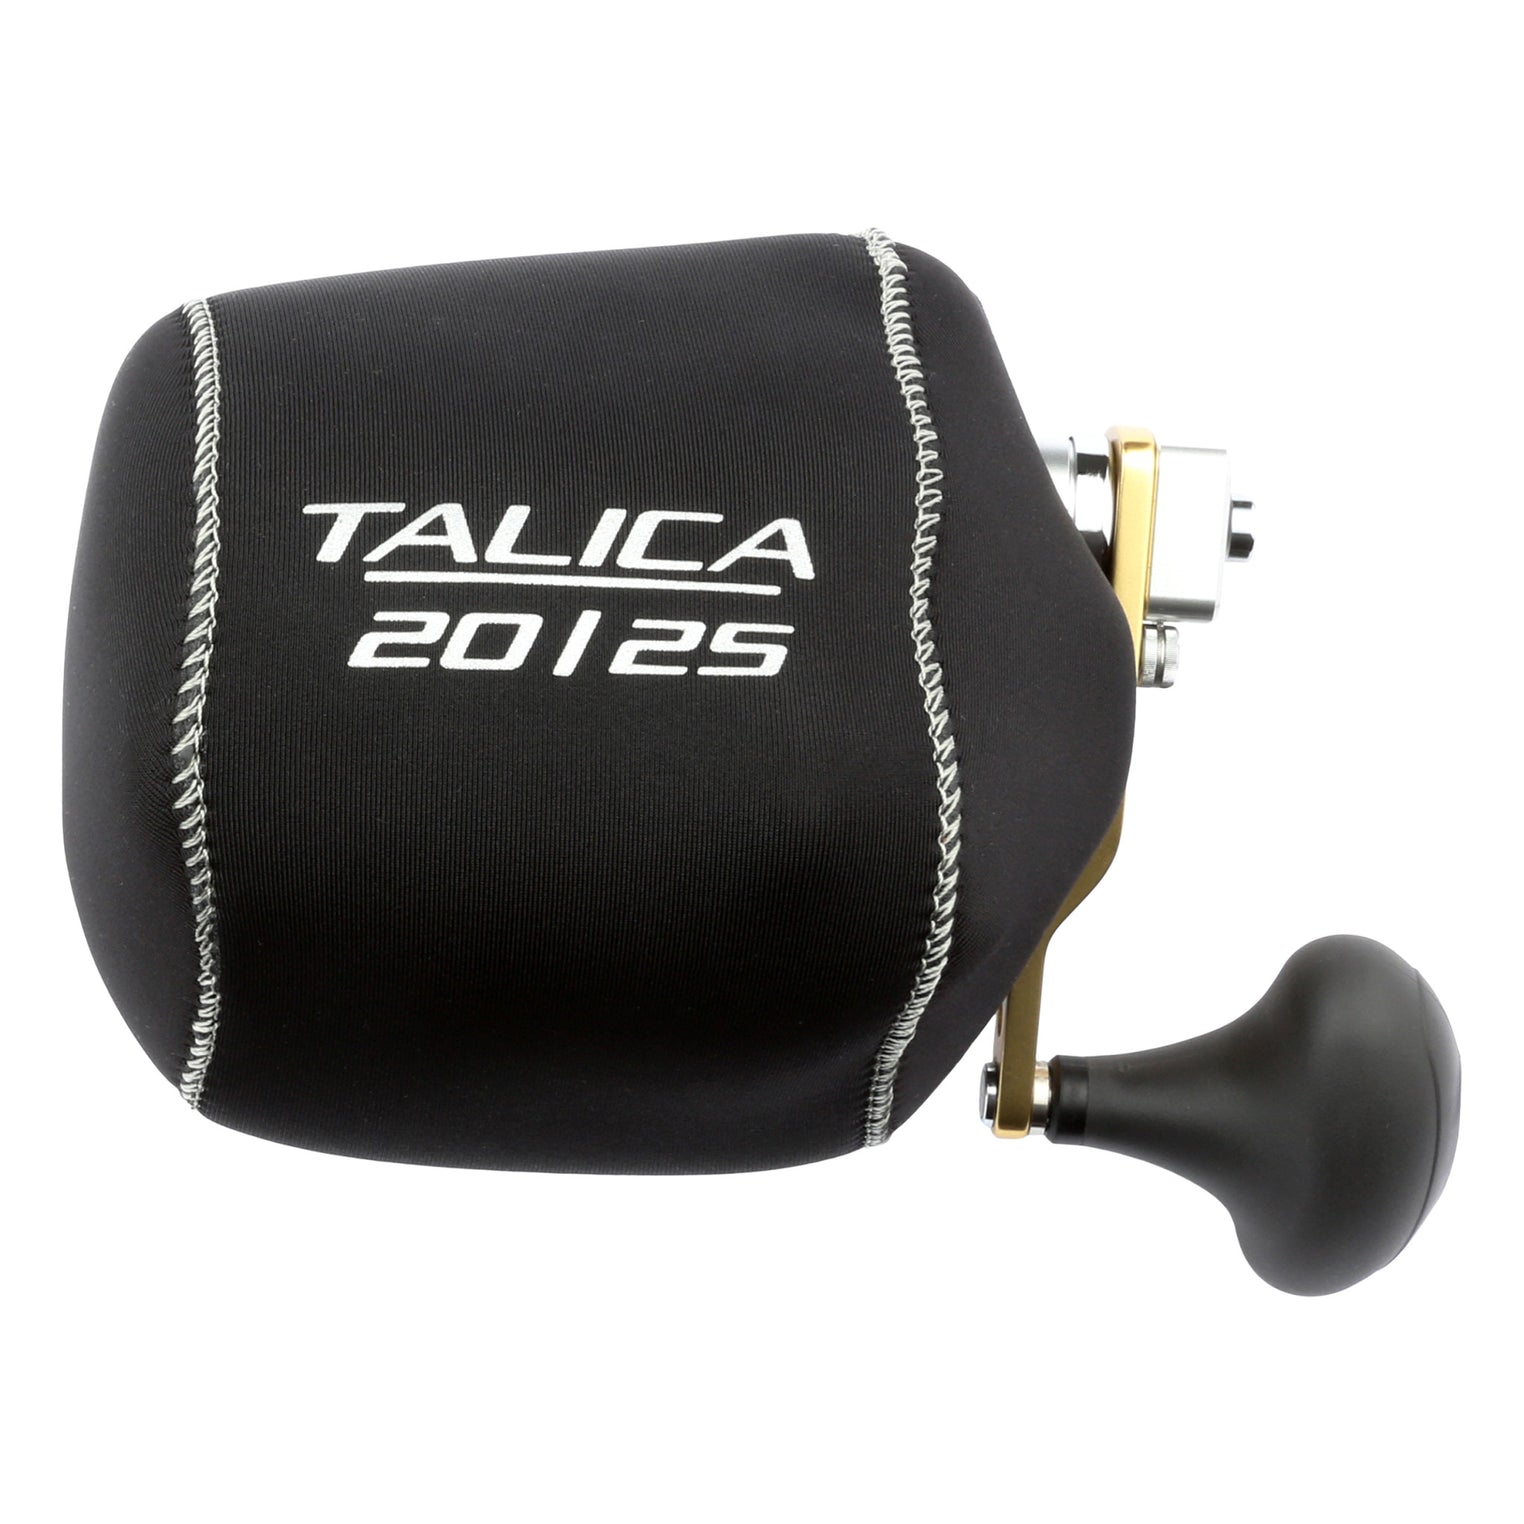 COUVRE-MOULINETS TALICA